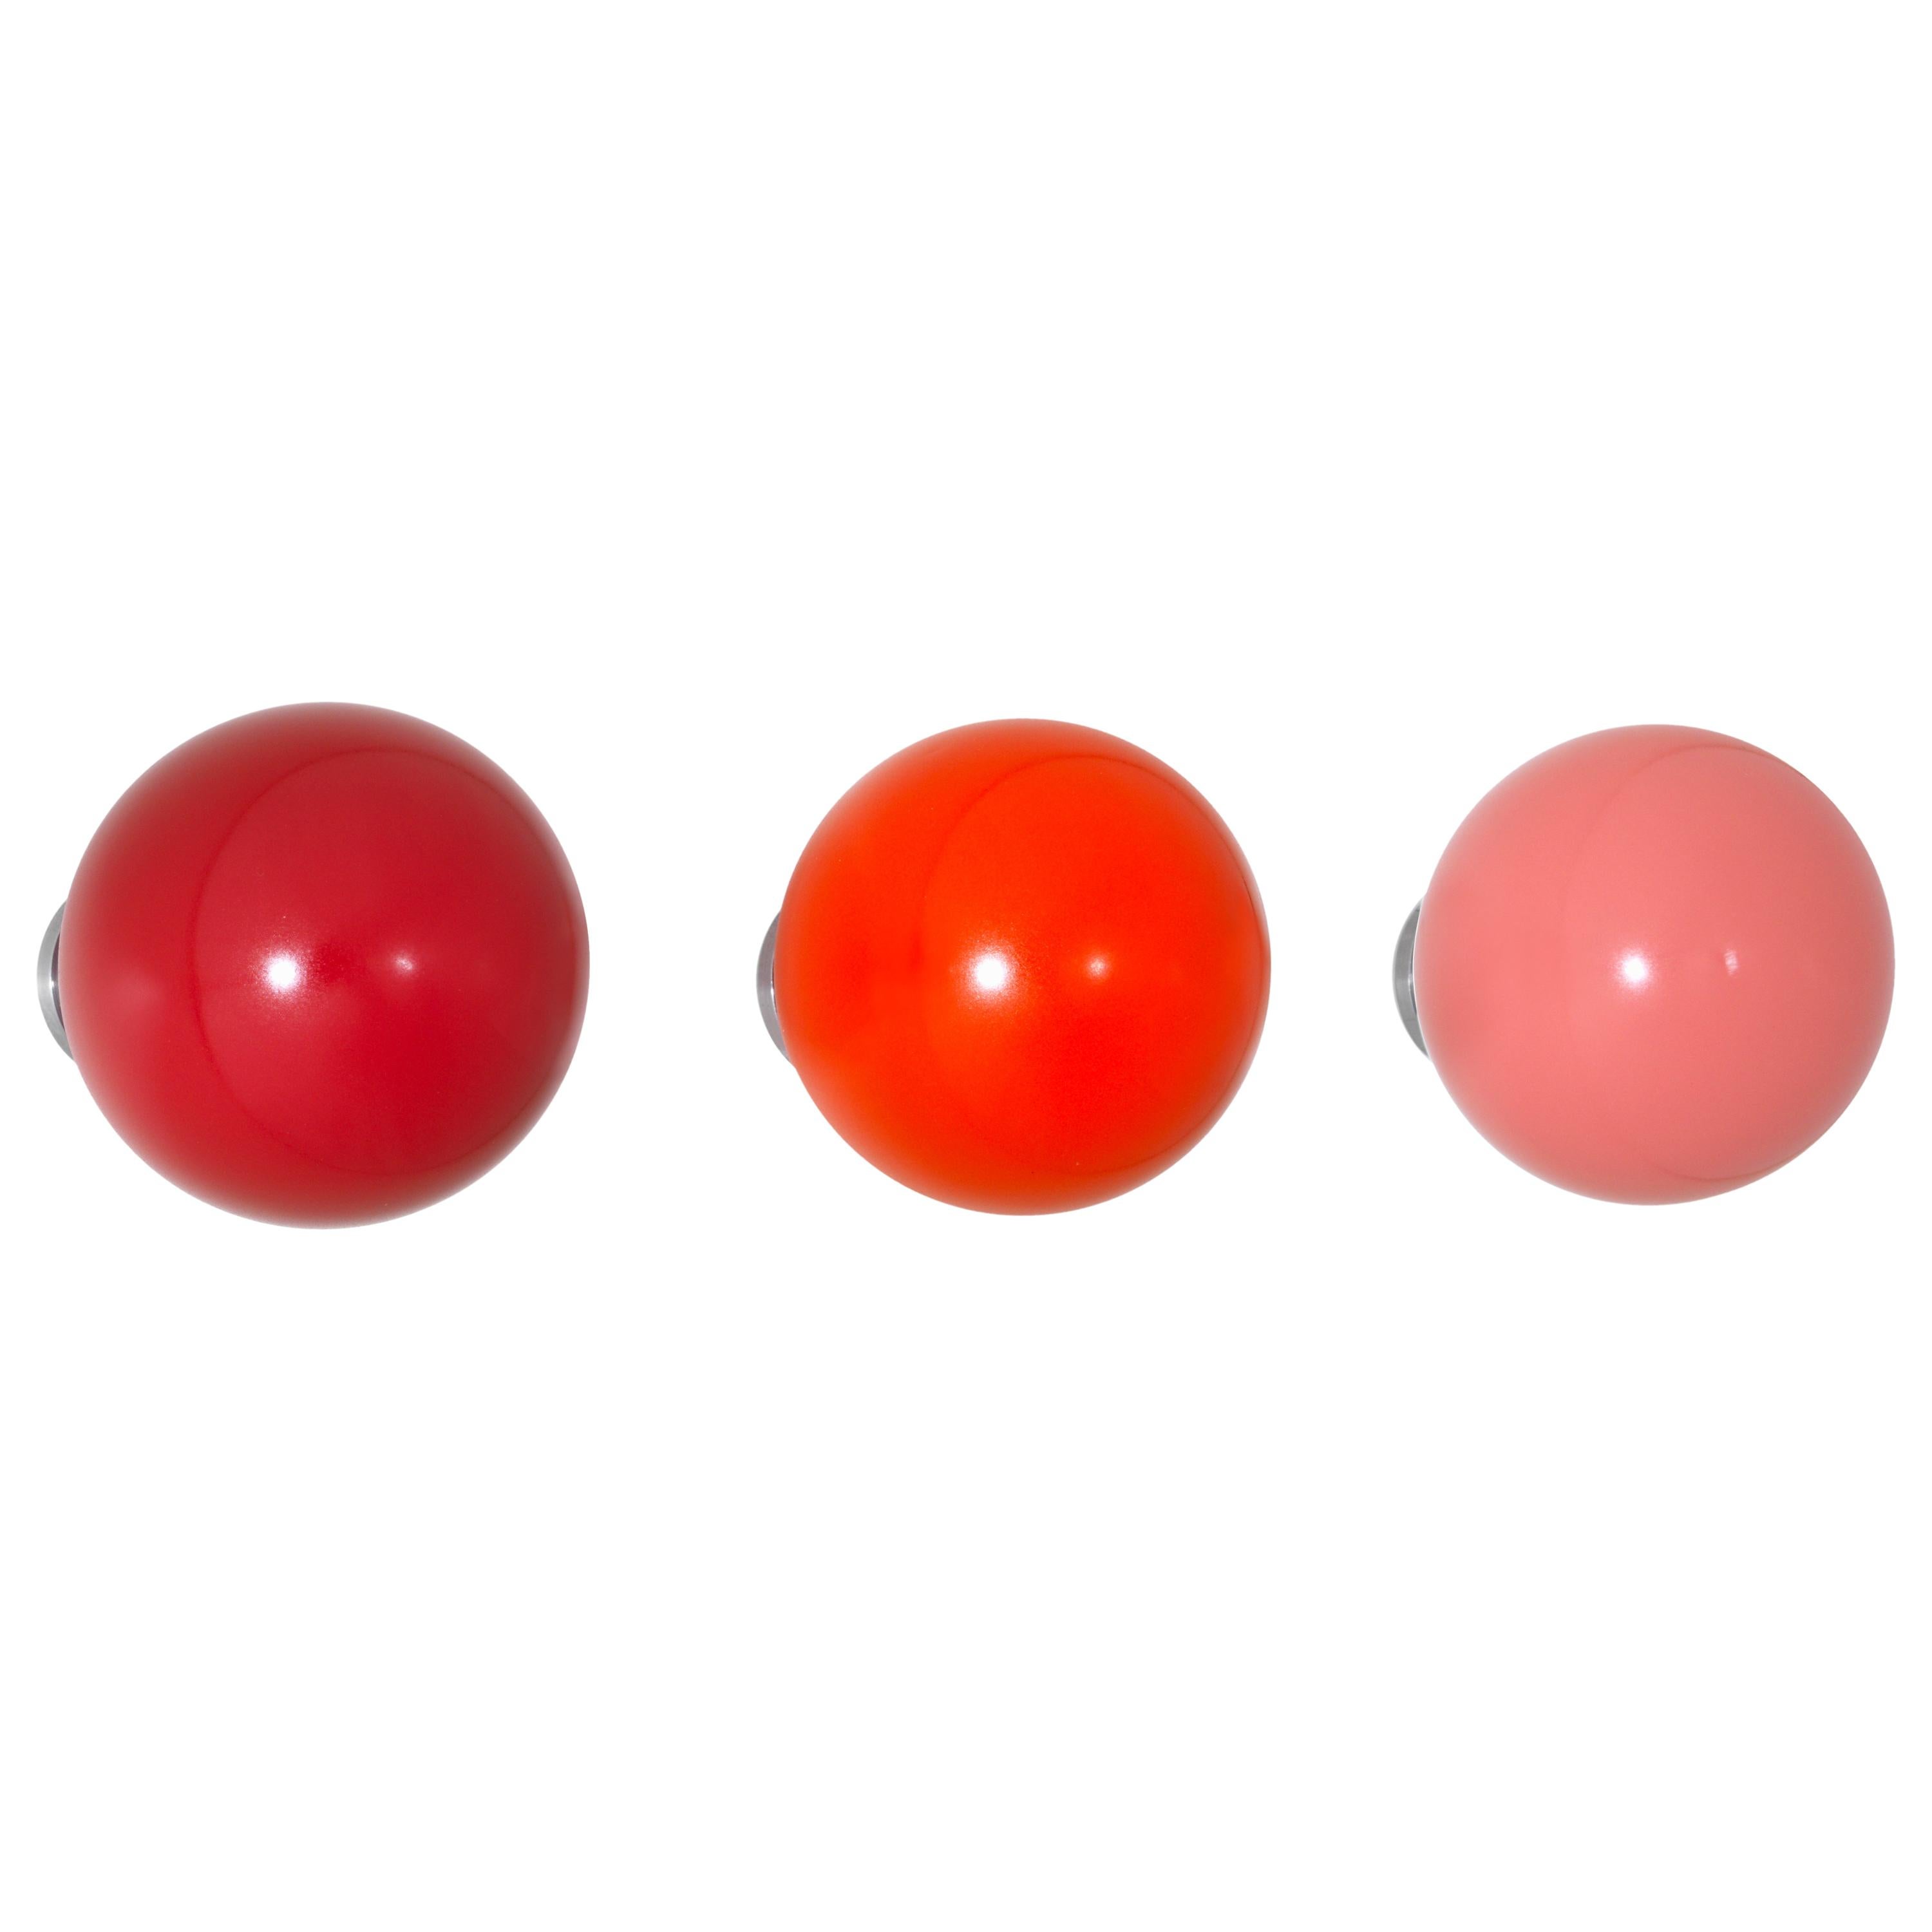 Vitra Coat Dots Set of 3 in Shades of Red by Hella Jongerius For Sale